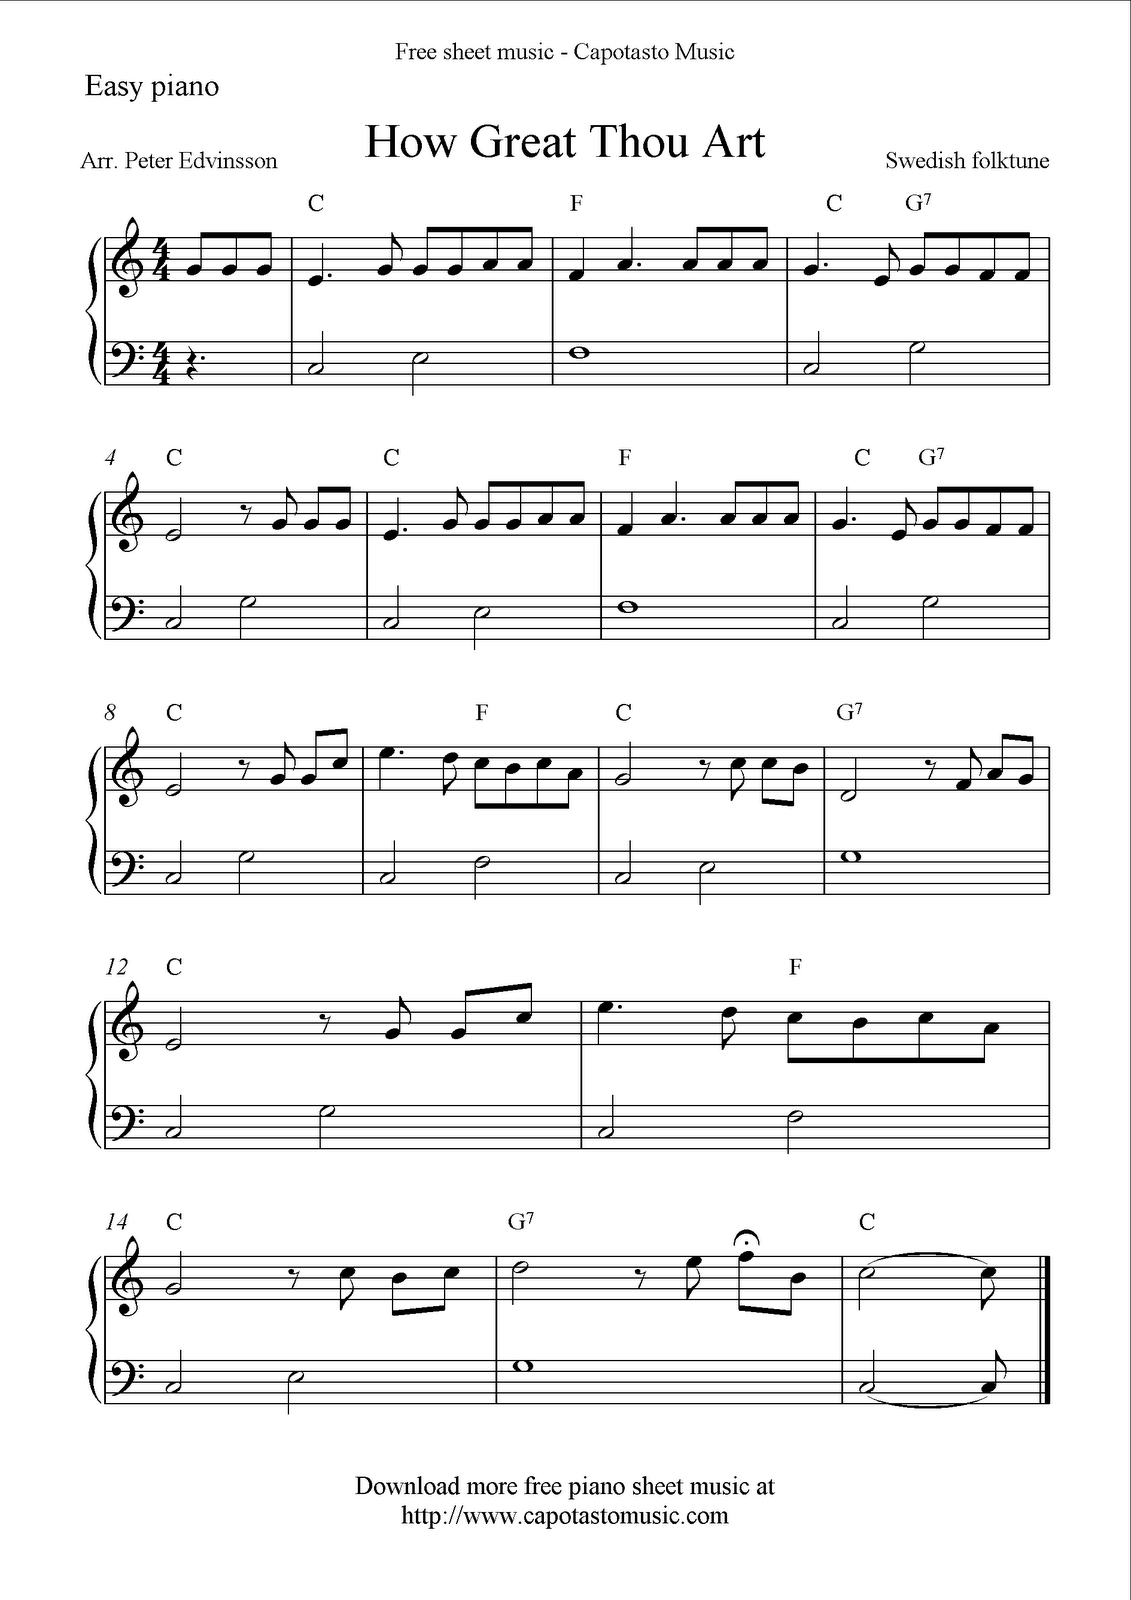 Free Sheet Music Pages &amp;amp; Guitar Lessons | Music | Pinterest - Free Printable Sheet Music For Piano